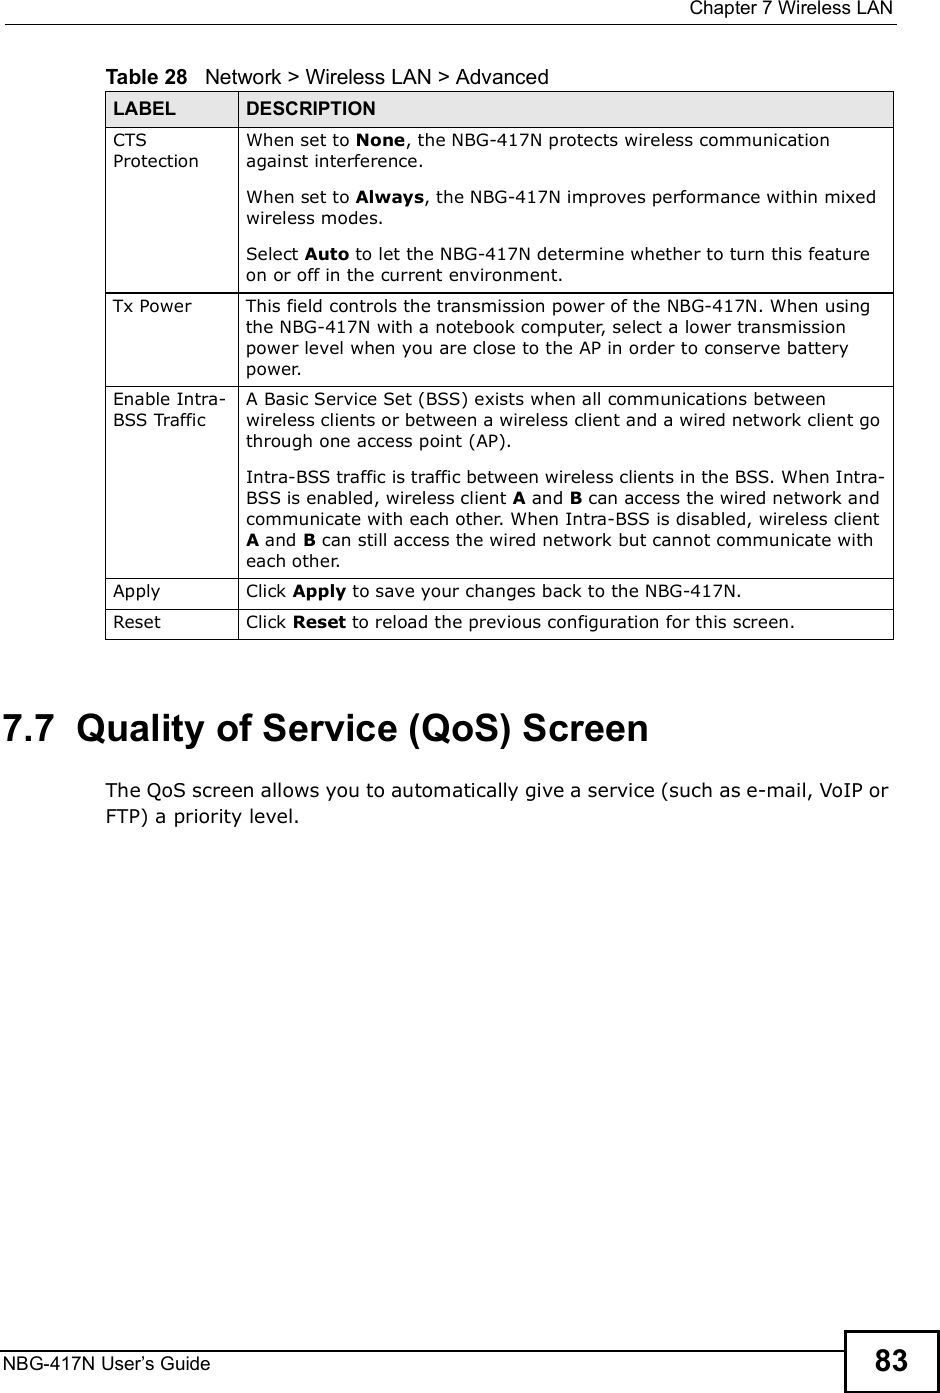  Chapter 7Wireless LANNBG-417N User s Guide 837.7  Quality of Service (QoS) ScreenThe QoS screen allows you to automatically give a service (such as e-mail, VoIP or FTP) a priority level.CTS ProtectionWhen set to None, the NBG-417N protects wireless communication against interference.When set to Always, the NBG-417N improves performance within mixed wireless modes.Select Auto to let the NBG-417N determine whether to turn this feature on or off in the current environment. Tx PowerThis field controls the transmission power of the NBG-417N. When using the NBG-417N with a notebook computer, select a lower transmission power level when you are close to the AP in order to conserve battery power.Enable Intra-BSS TrafficA Basic Service Set (BSS) exists when all communications between wireless clients or between a wireless client and a wired network client go through one access point (AP). Intra-BSS traffic is traffic between wireless clients in the BSS. When Intra-BSS is enabled, wireless client A and B can access the wired network and communicate with each other. When Intra-BSS is disabled, wireless client A and B can still access the wired network but cannot communicate with each other.Apply Click Apply to save your changes back to the NBG-417N.Reset Click Reset to reload the previous configuration for this screen.Table 28   Network &gt; Wireless LAN &gt; AdvancedLABEL DESCRIPTION